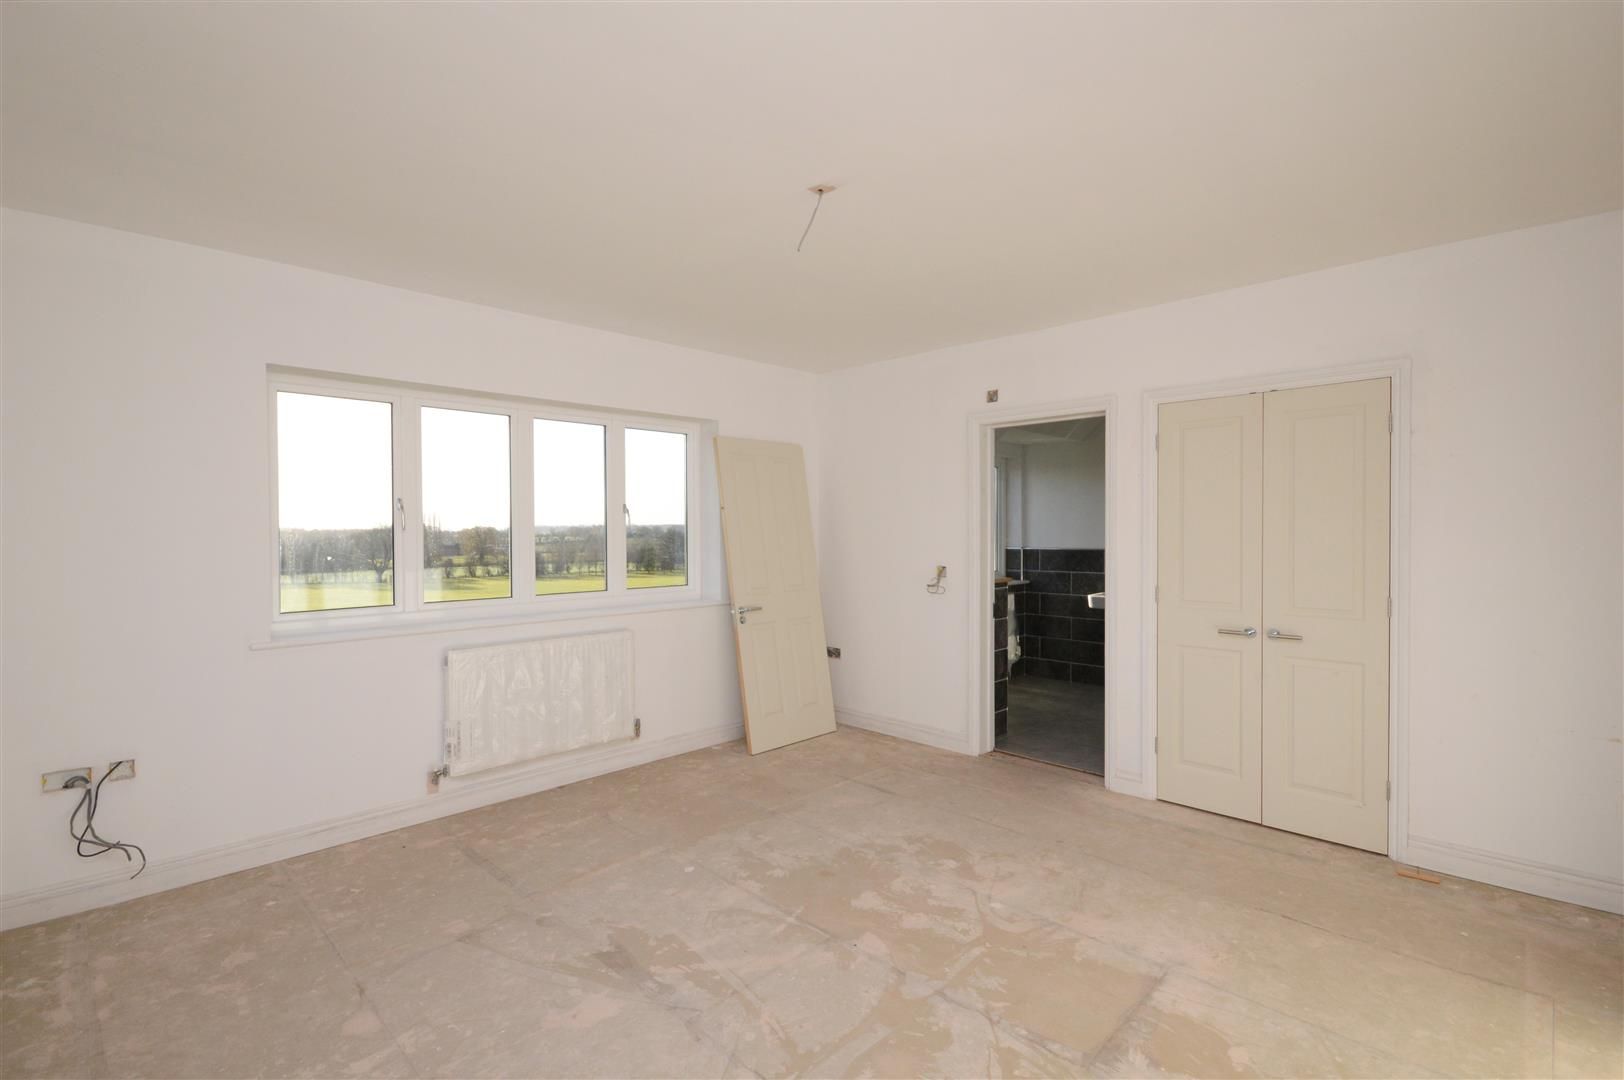 4 bed detached for sale in Marden 13